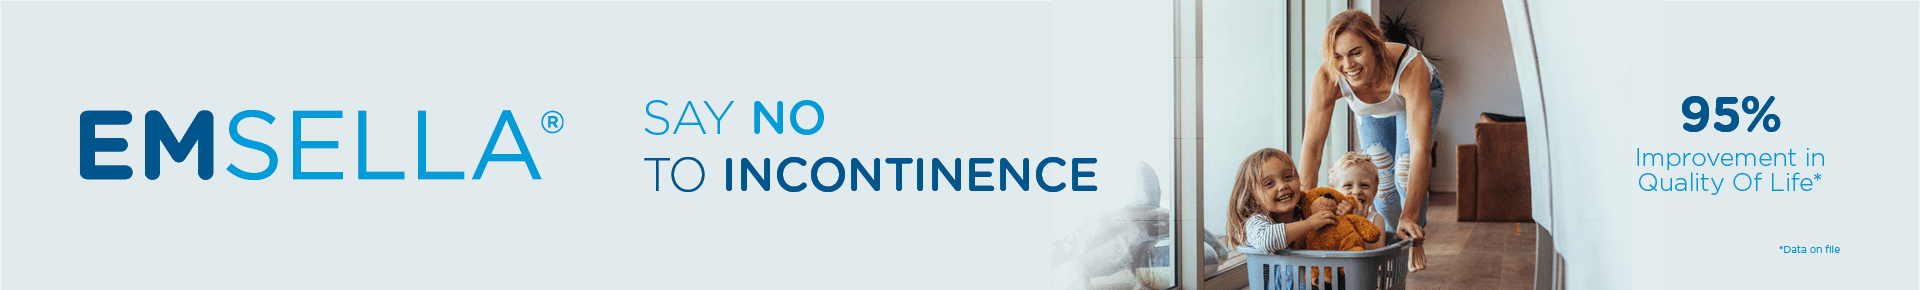 Emsella for incontinence at SANTÉ Aesthetics & Wellness in Portland, Oregon.